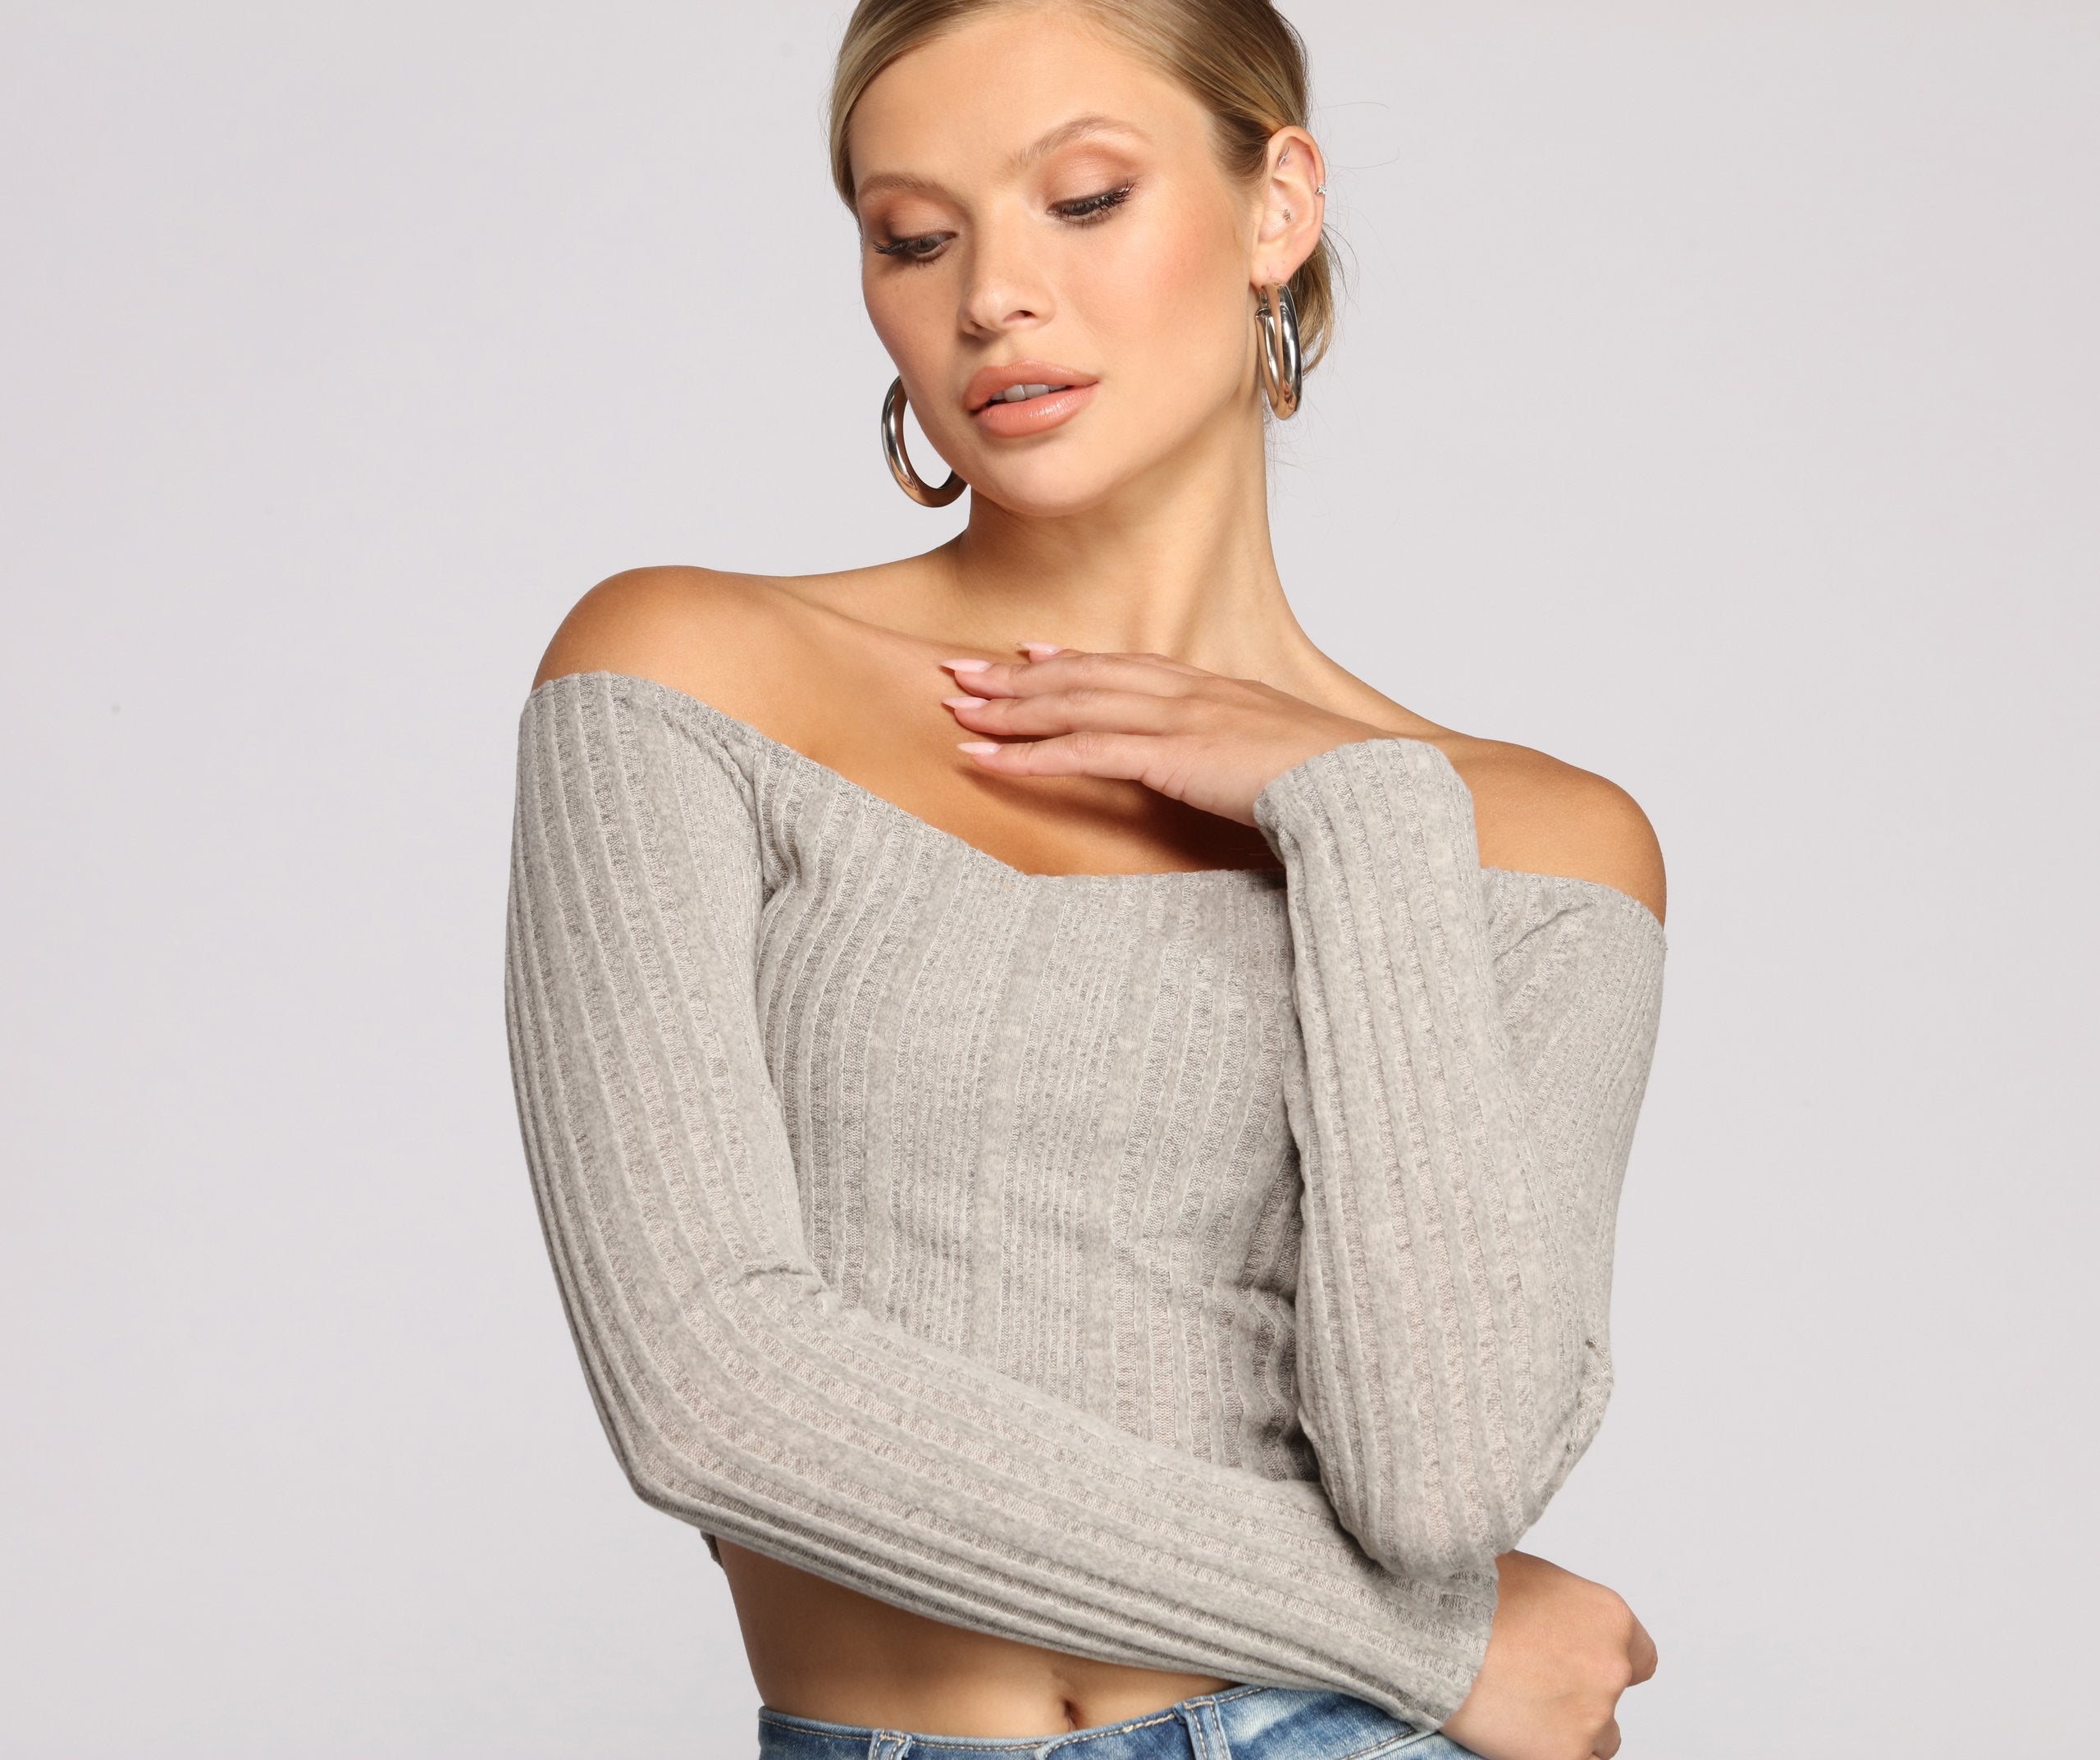 Keepin' Knit Cute And Casual Crop Top